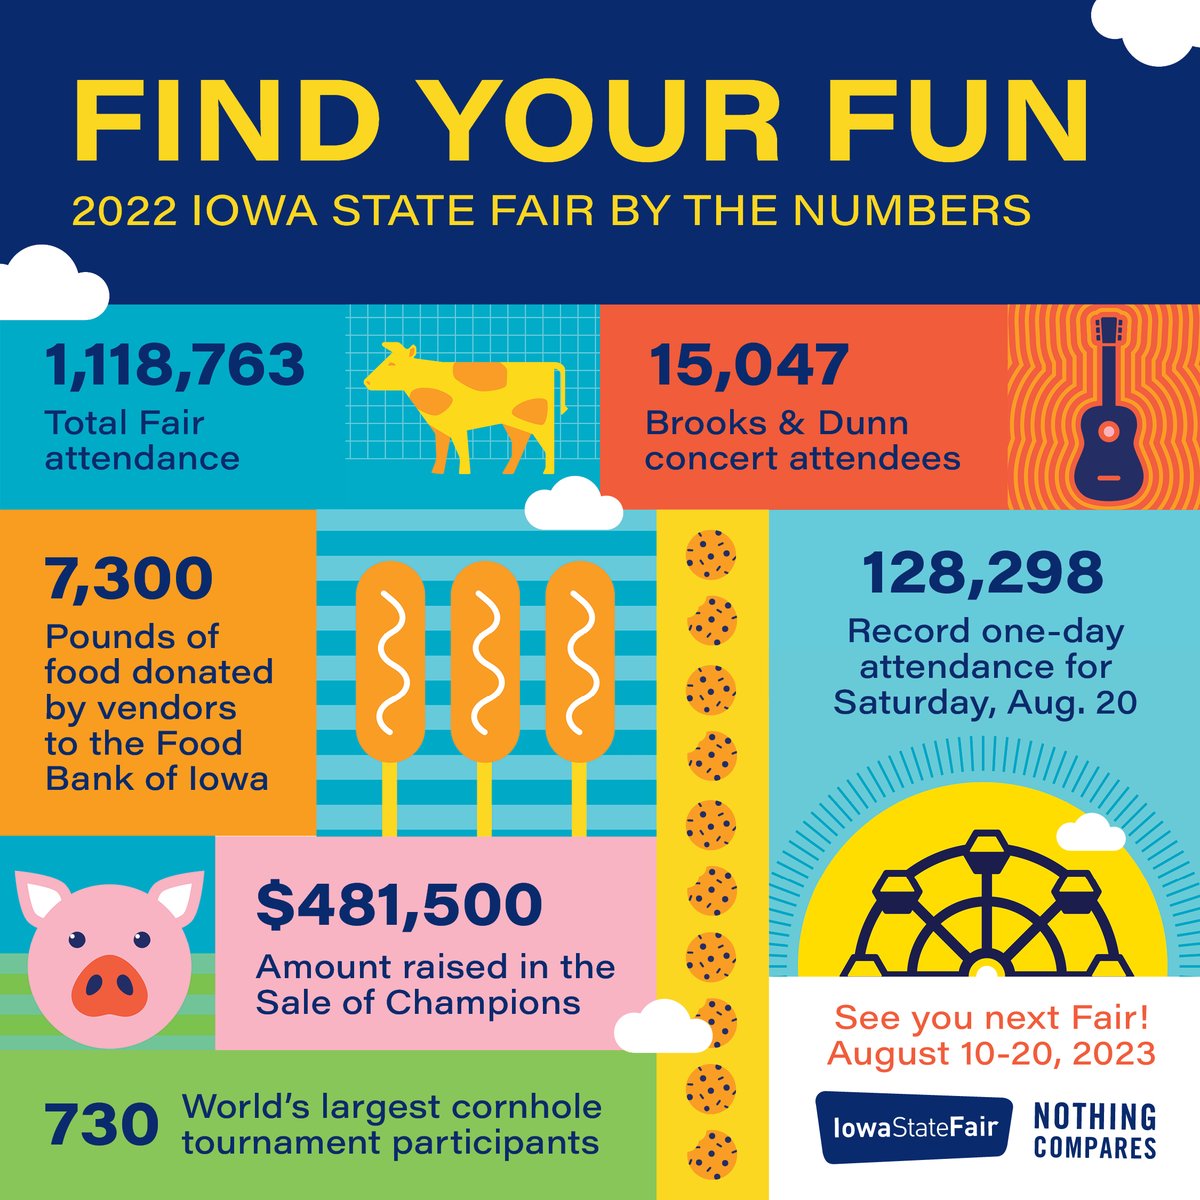 How did you Find Your Fun this year? [answer in emojis only] 🐮🎸🐷🍪🎡🌭 #ISFFindYourFun